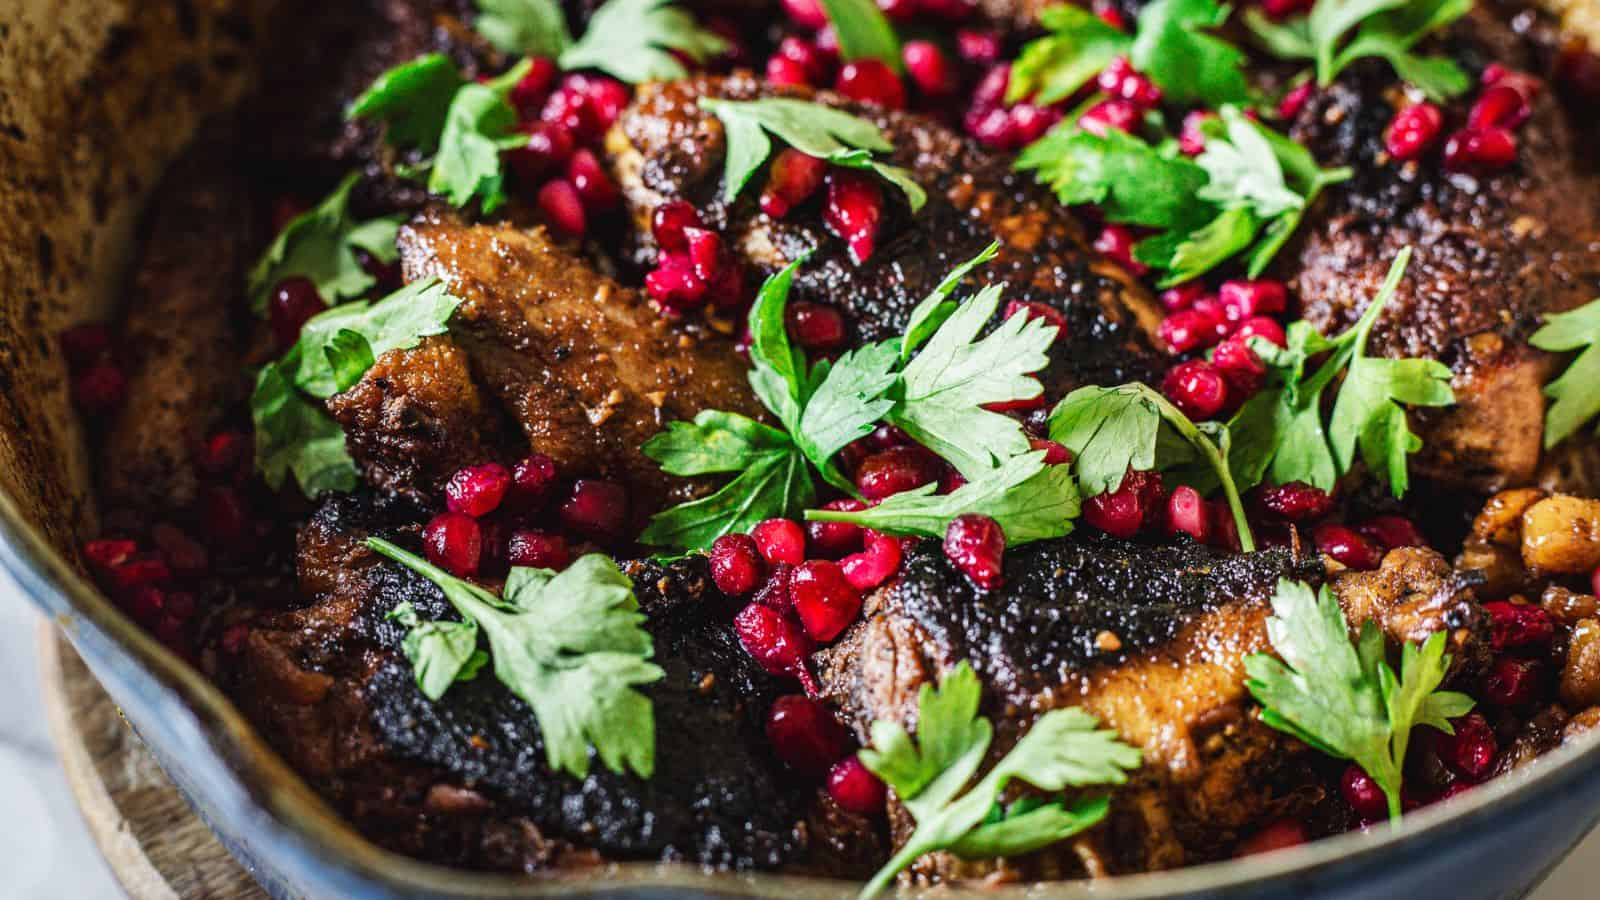 Roasted chicken with pomegranate and parsley.